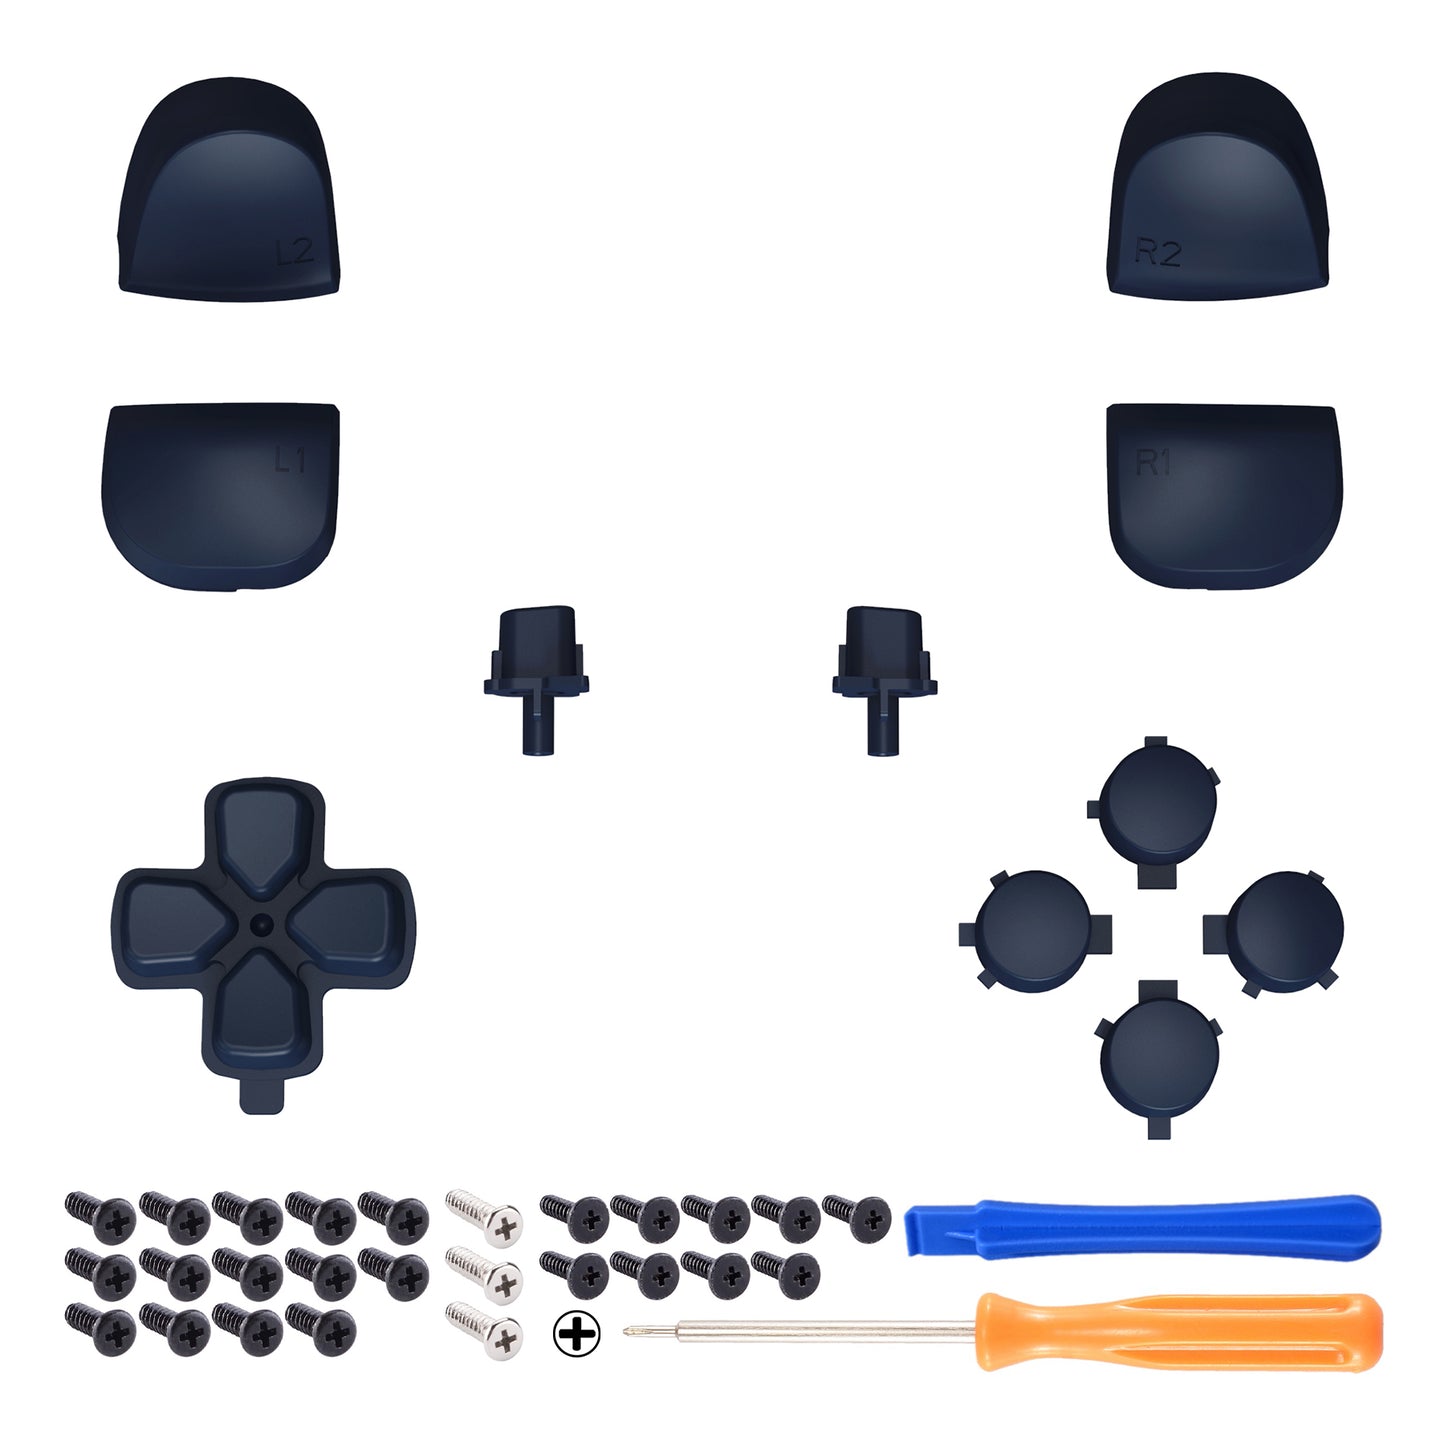 eXtremeRate Retail Replacement D-pad R1 L1 R2 L2 Triggers Share Options Face Buttons, Midnight Blue Full Set Buttons Compatible With ps5 Controller BDM-010 & BDM-020 - JPF1014G2